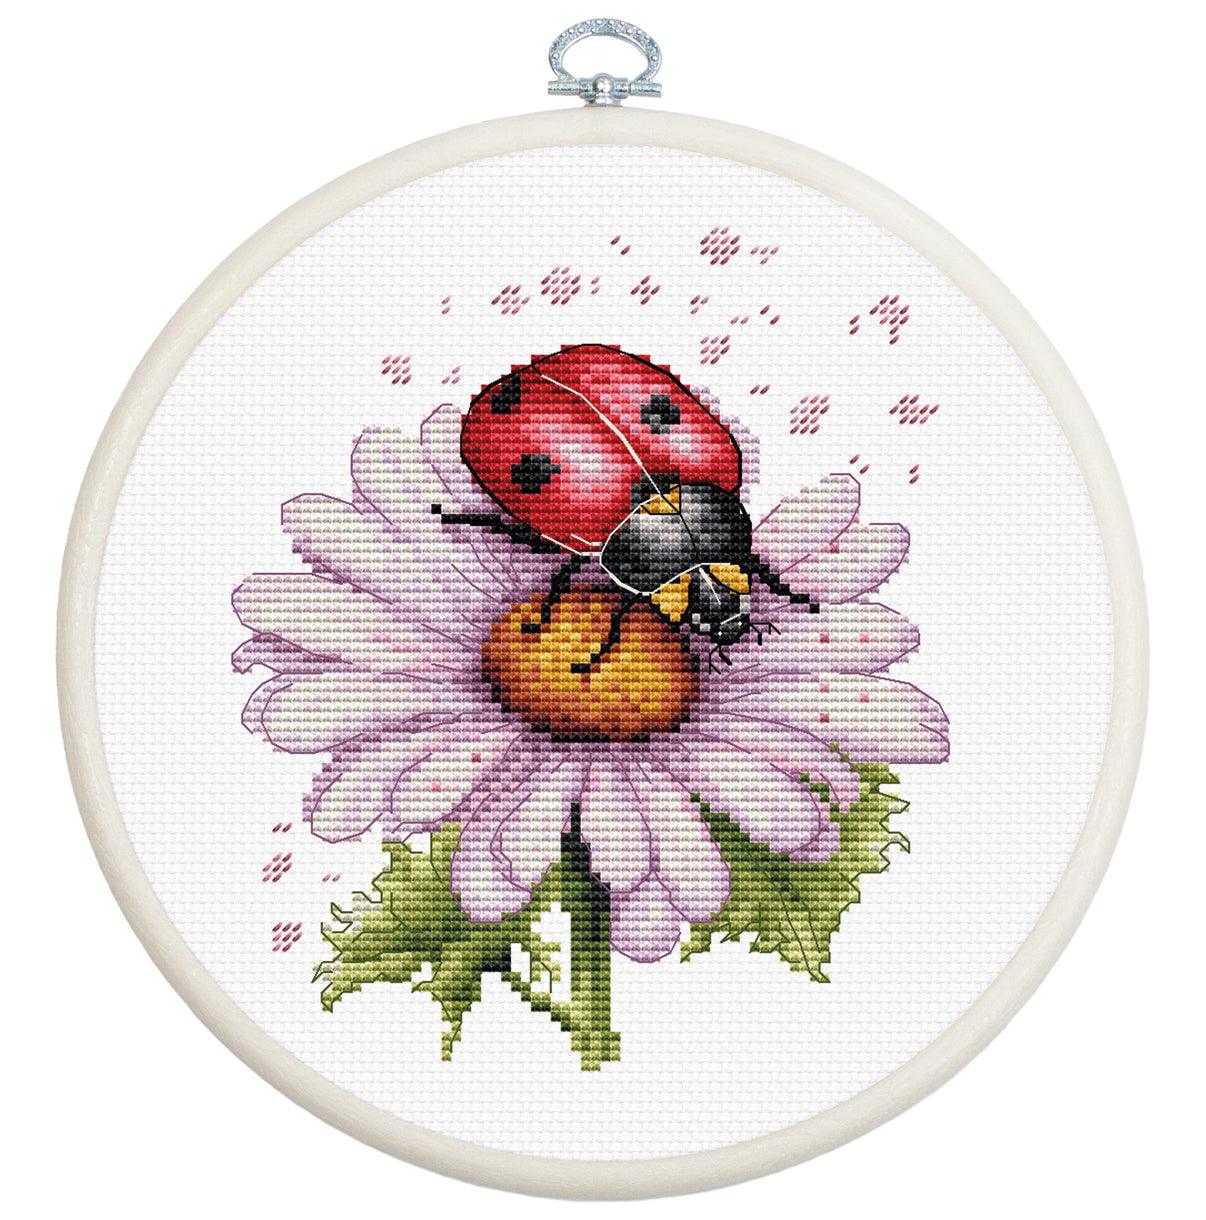 Cross Stitch Kit with Hoop Included Luca-S - Field Flower, BC231 - Luca-S Cross Stitch Kits